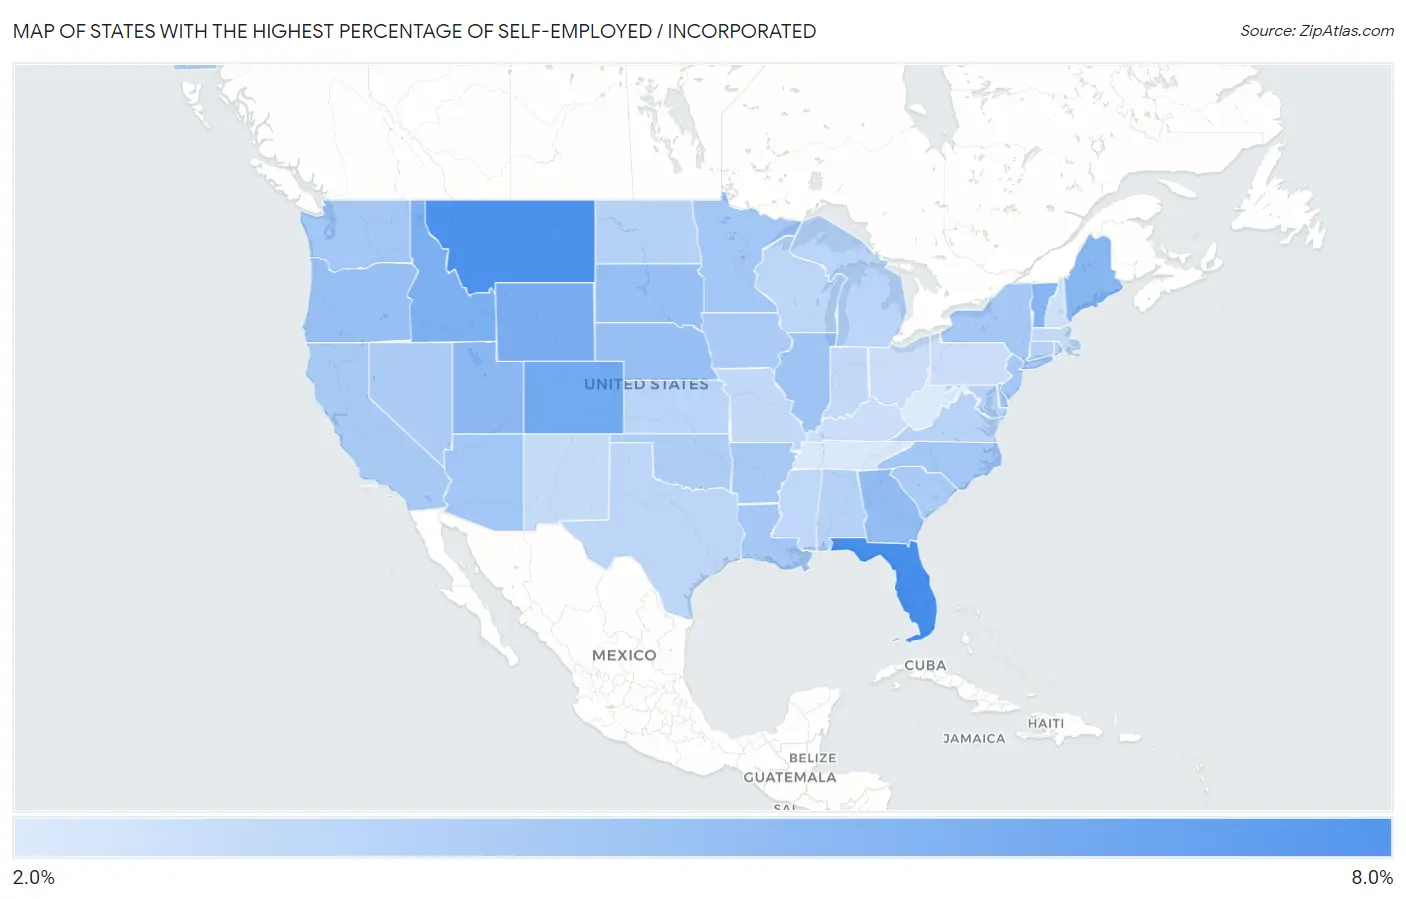 States with the Highest Percentage of Self-Employed / Incorporated in the United States Map